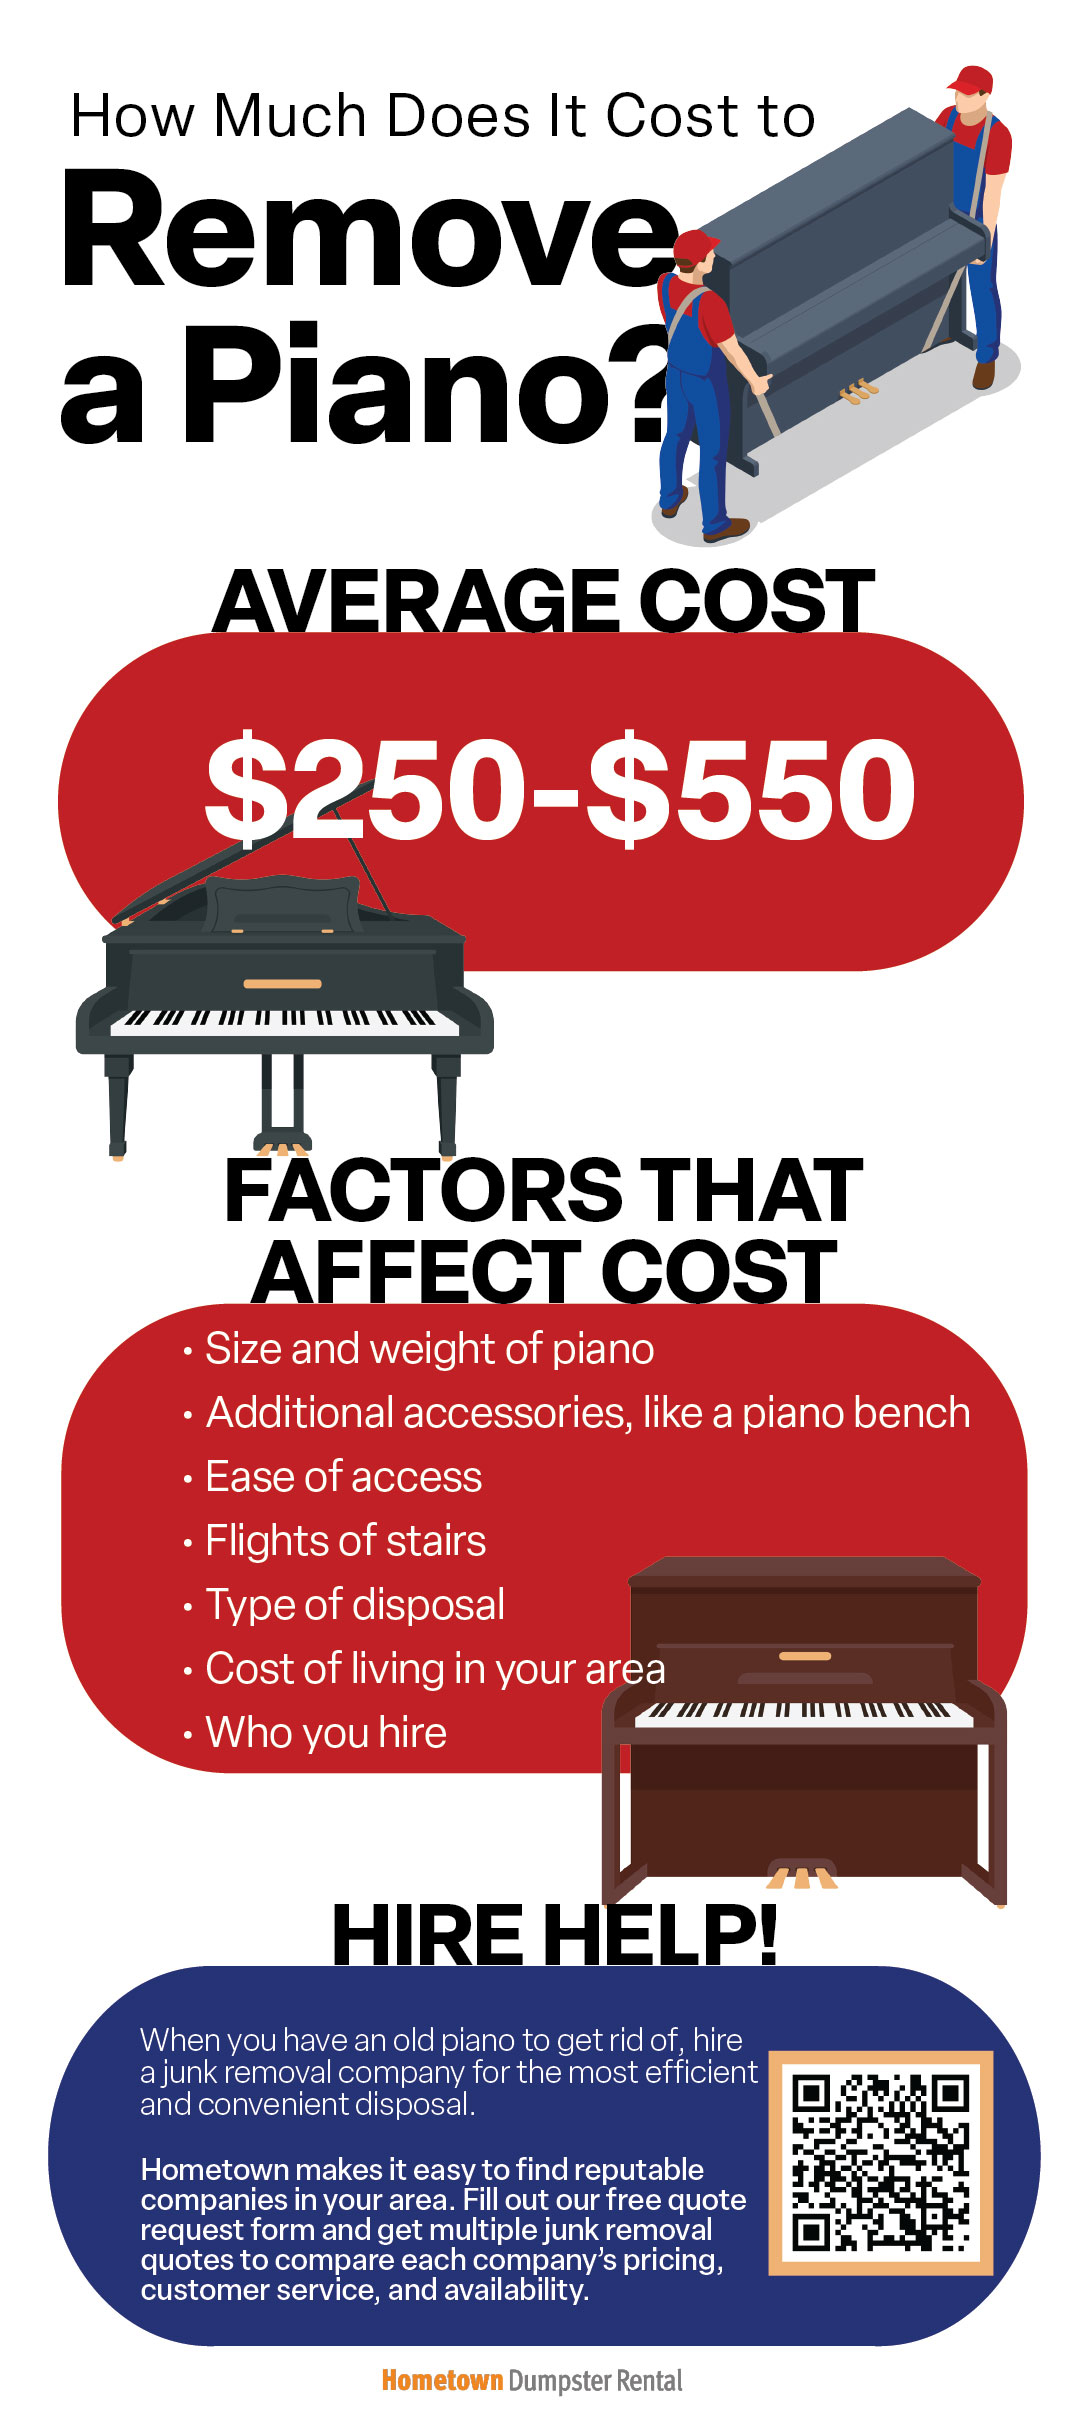 Cost to Remove a Piano Infographic